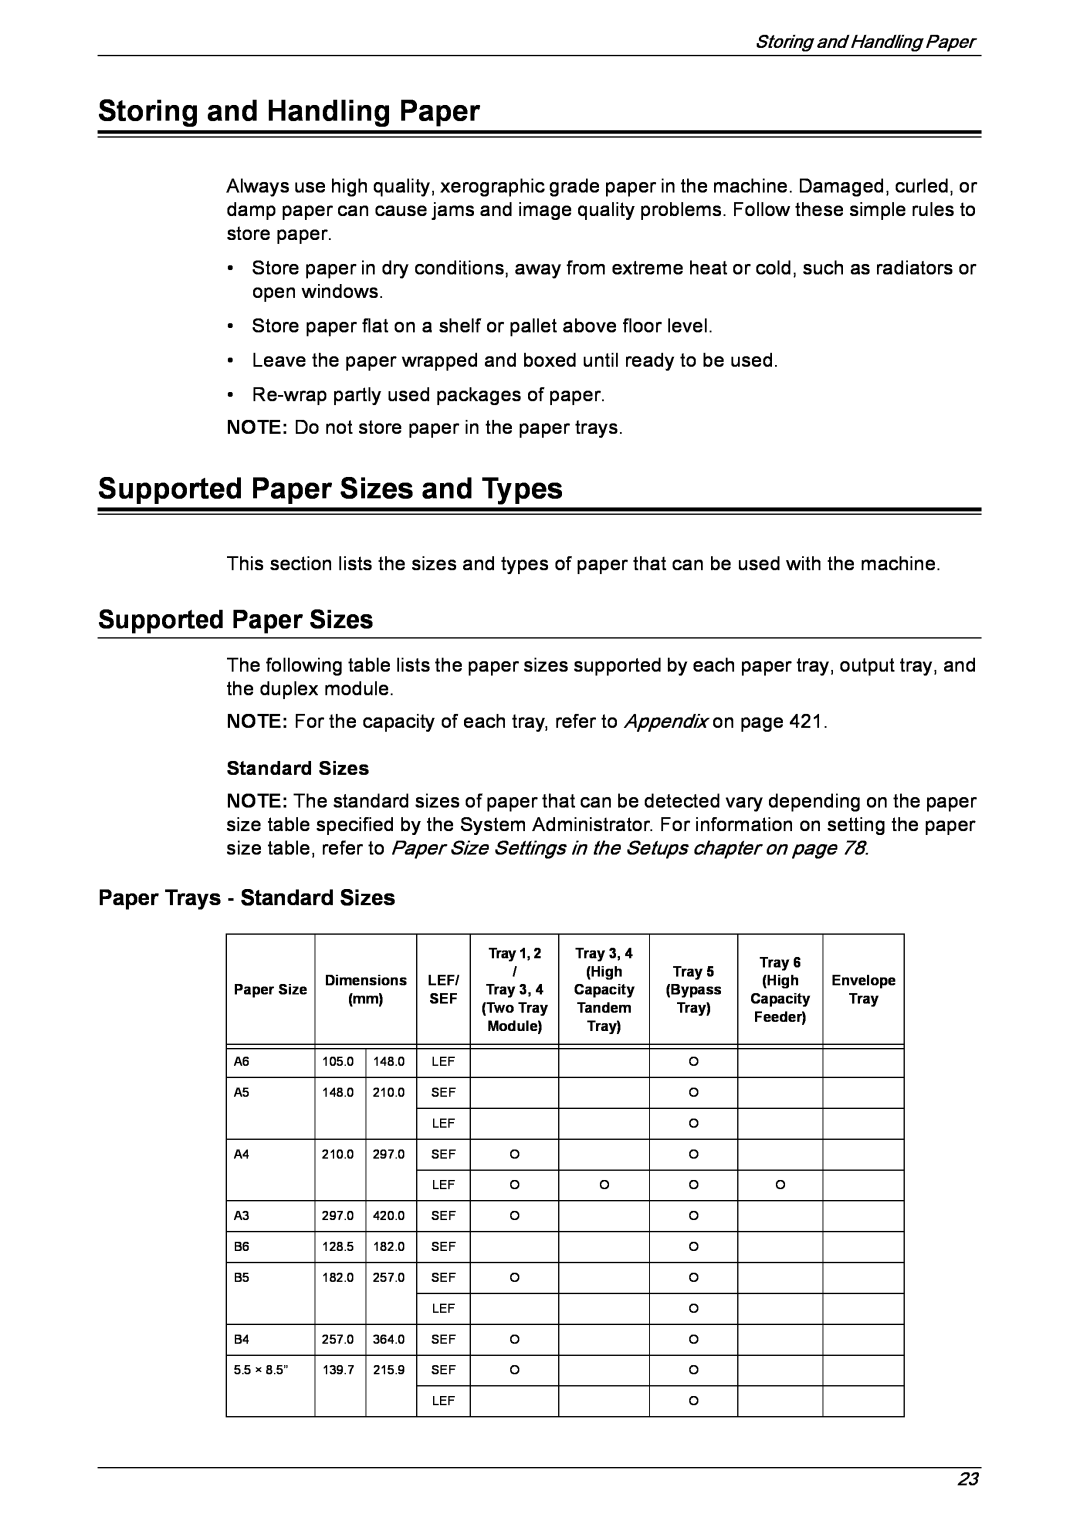 Xerox 5222 manual Storing and Handling Paper, Supported Paper Sizes and Types, Standard Sizes 